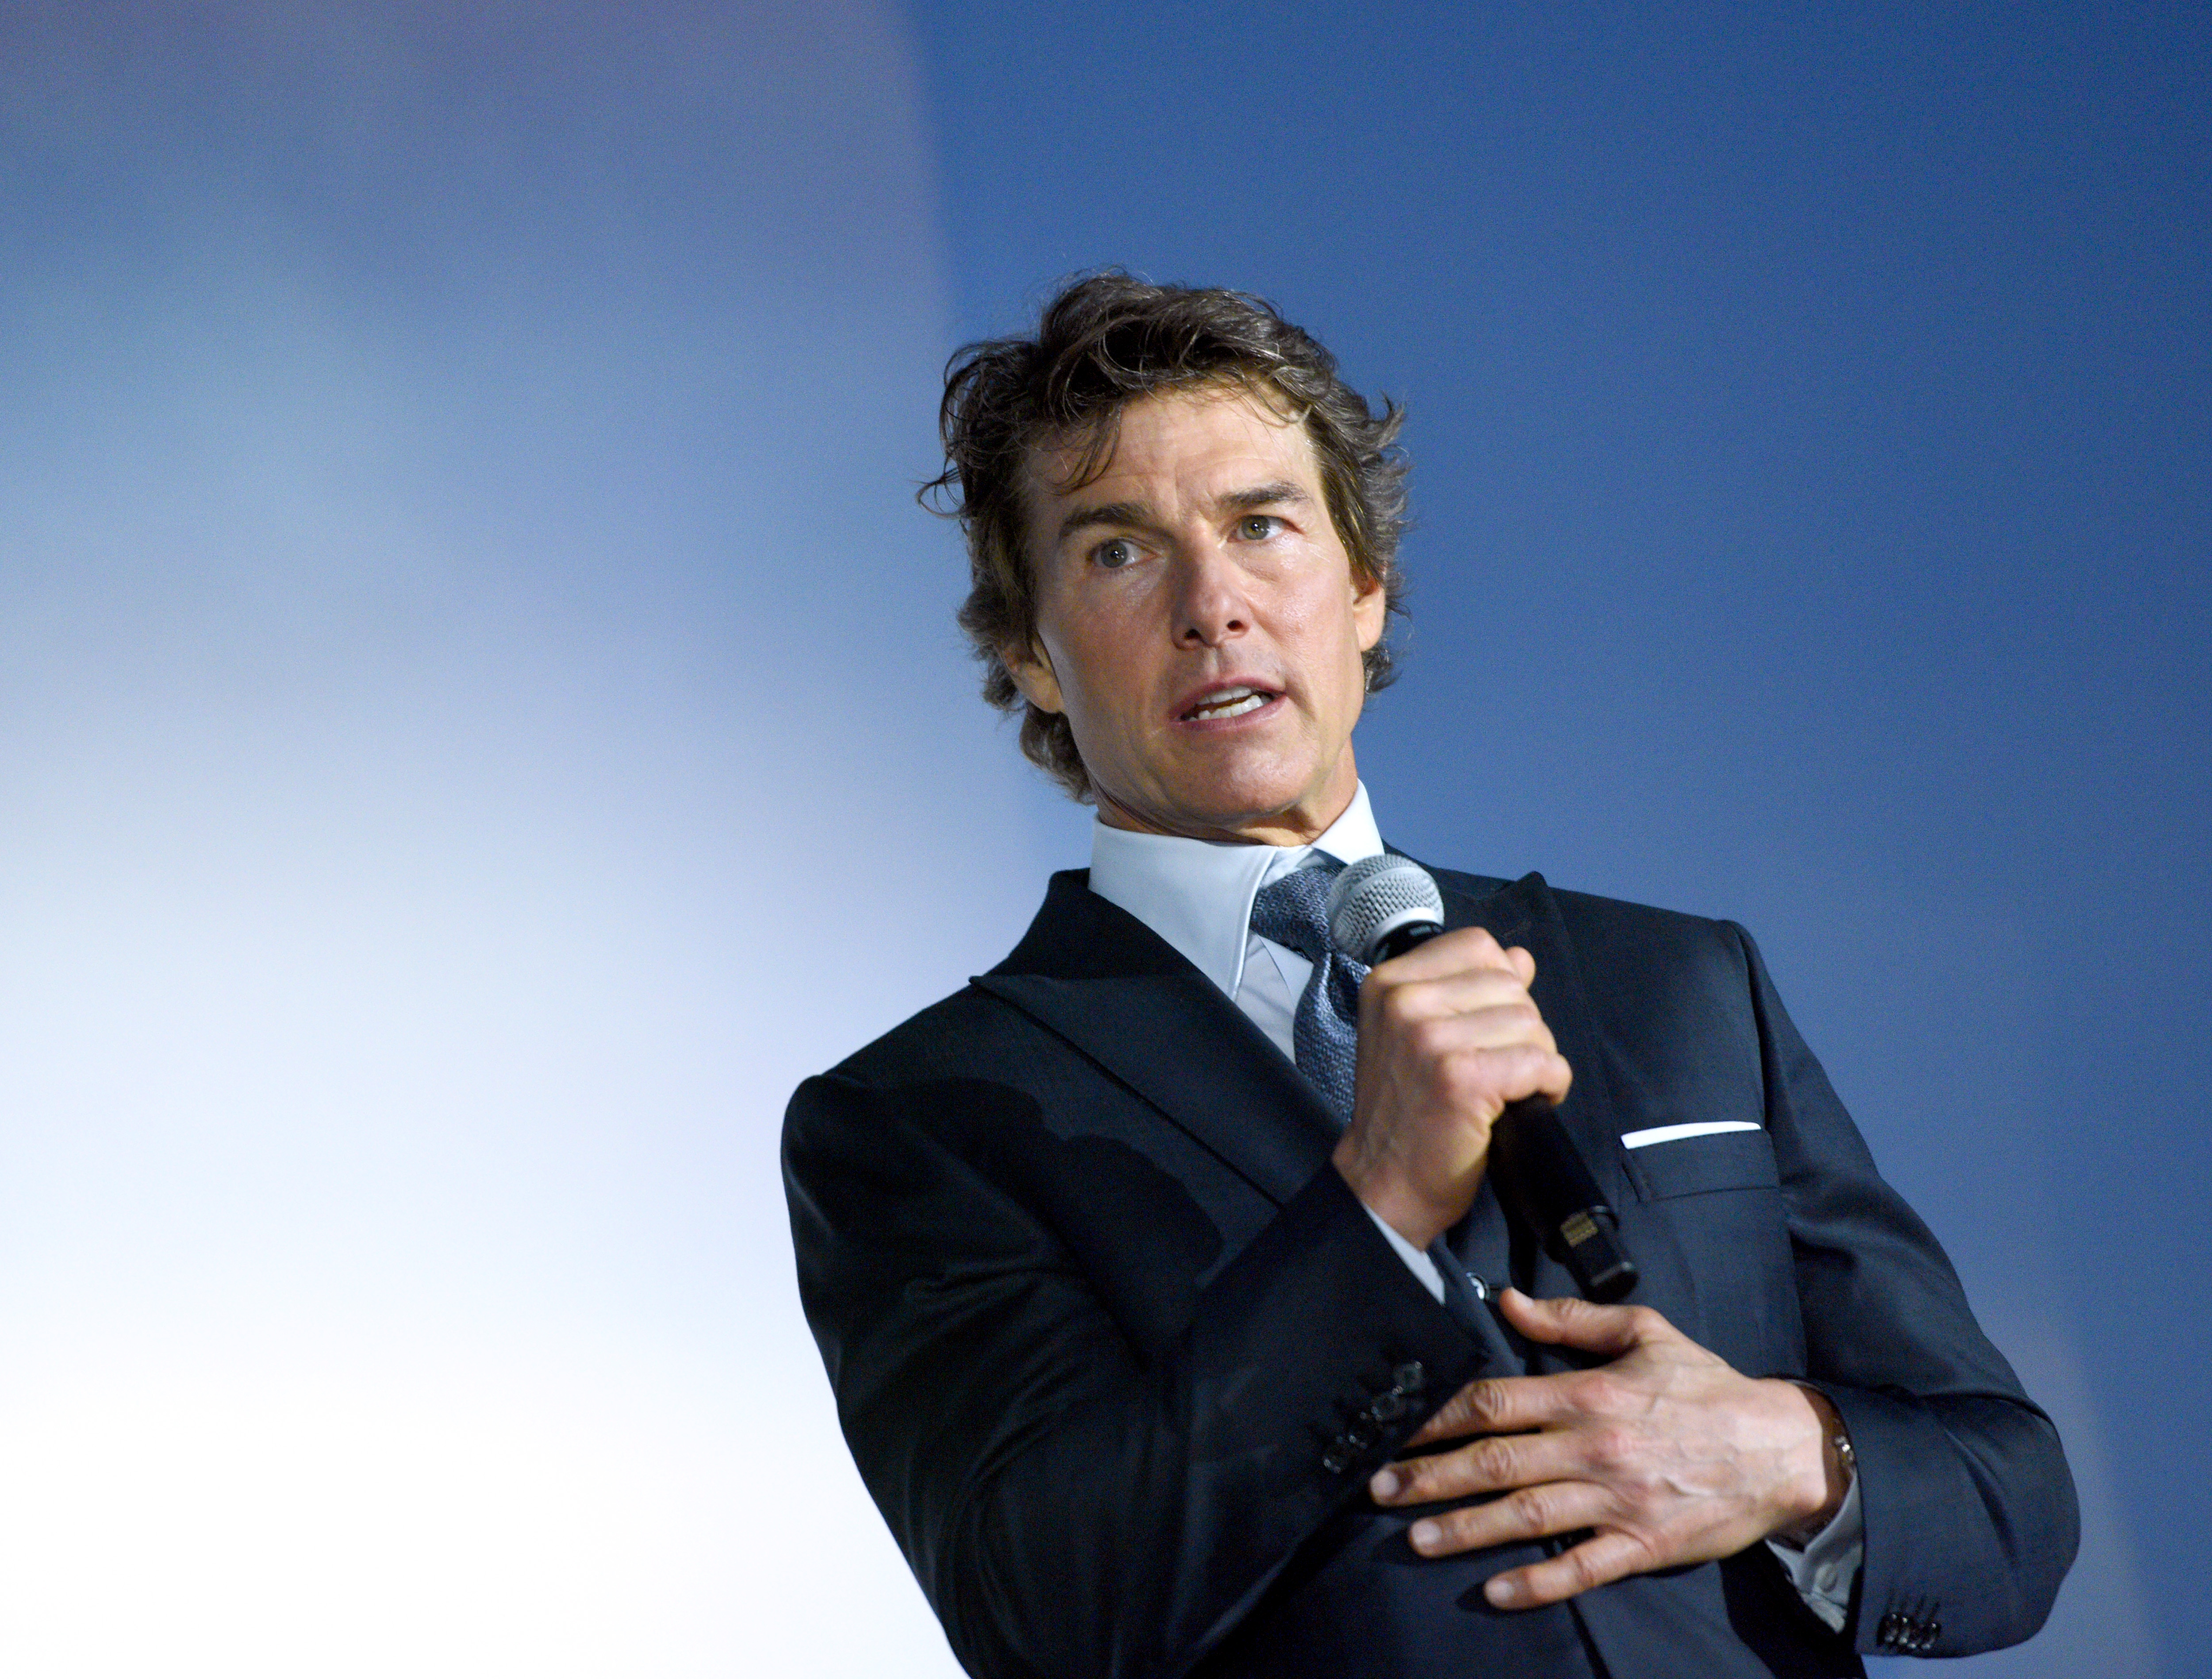 Tom Cruise speaks onstage during the Global Premiere of "Top Gun: Maverick" on May 4, 2022, in San Diego, California. | Source: Getty Images